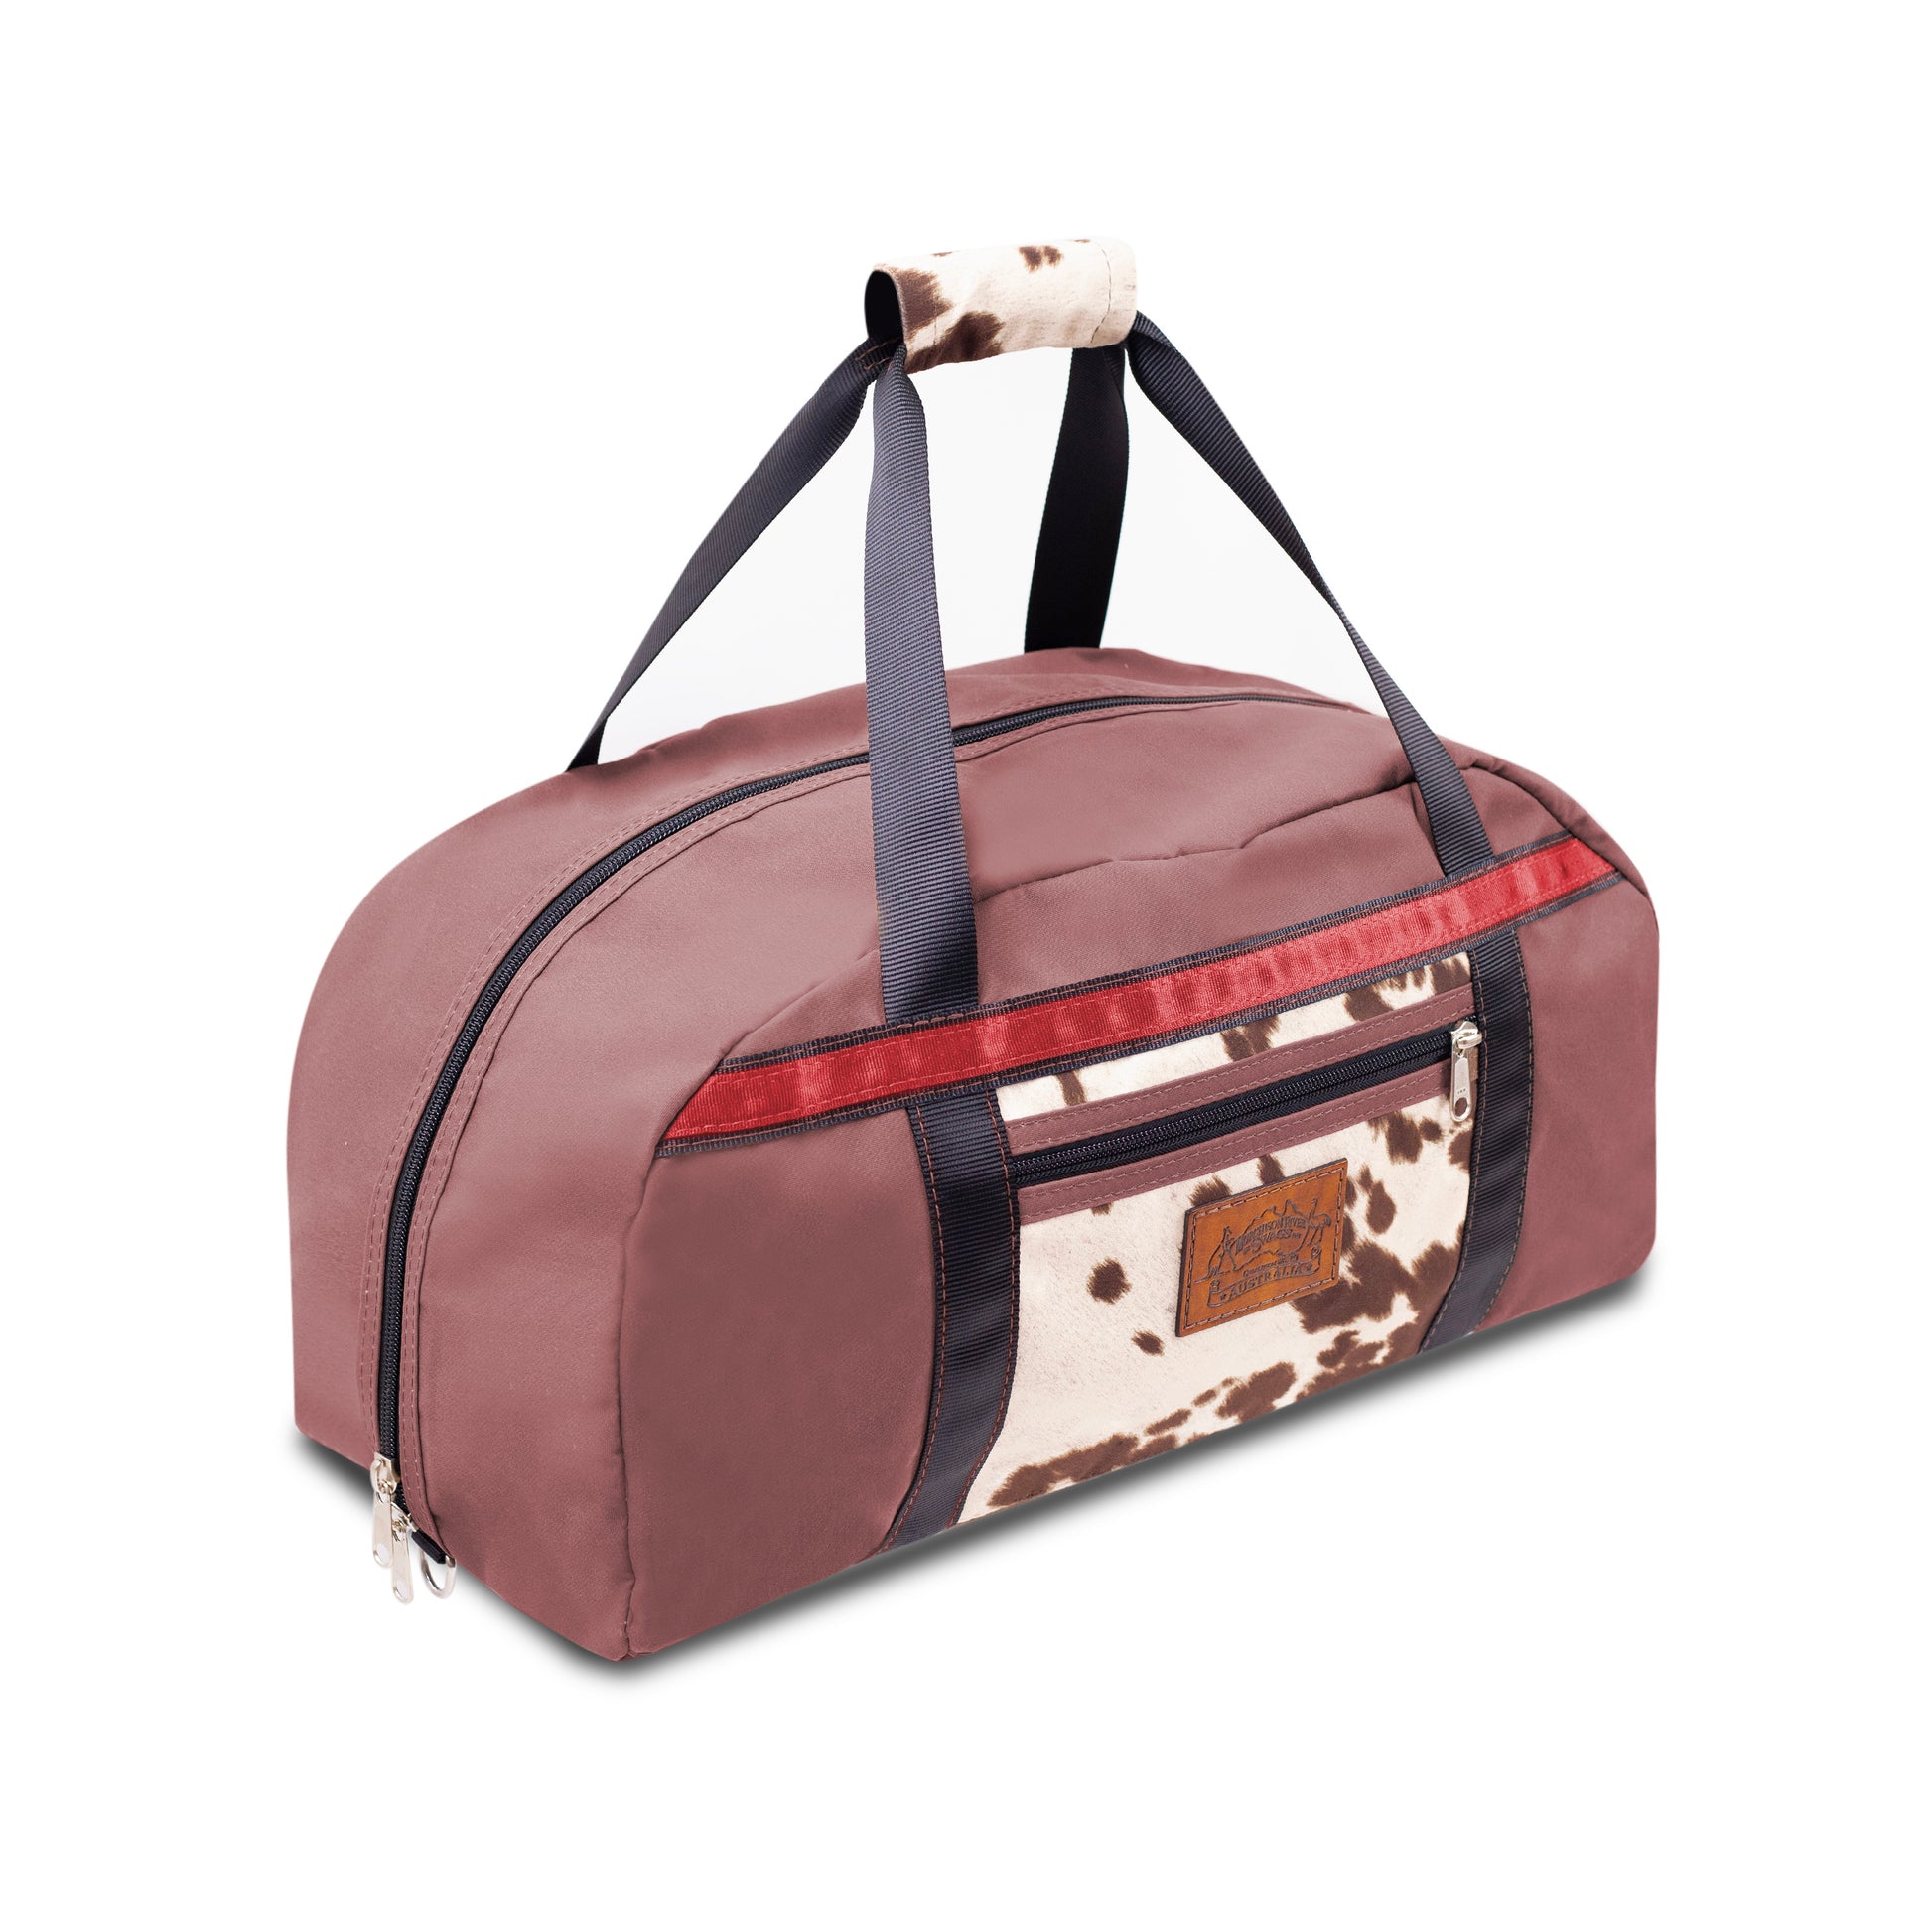 Burgundy Overnight Canvas Bag with limited edition cow print fabric.